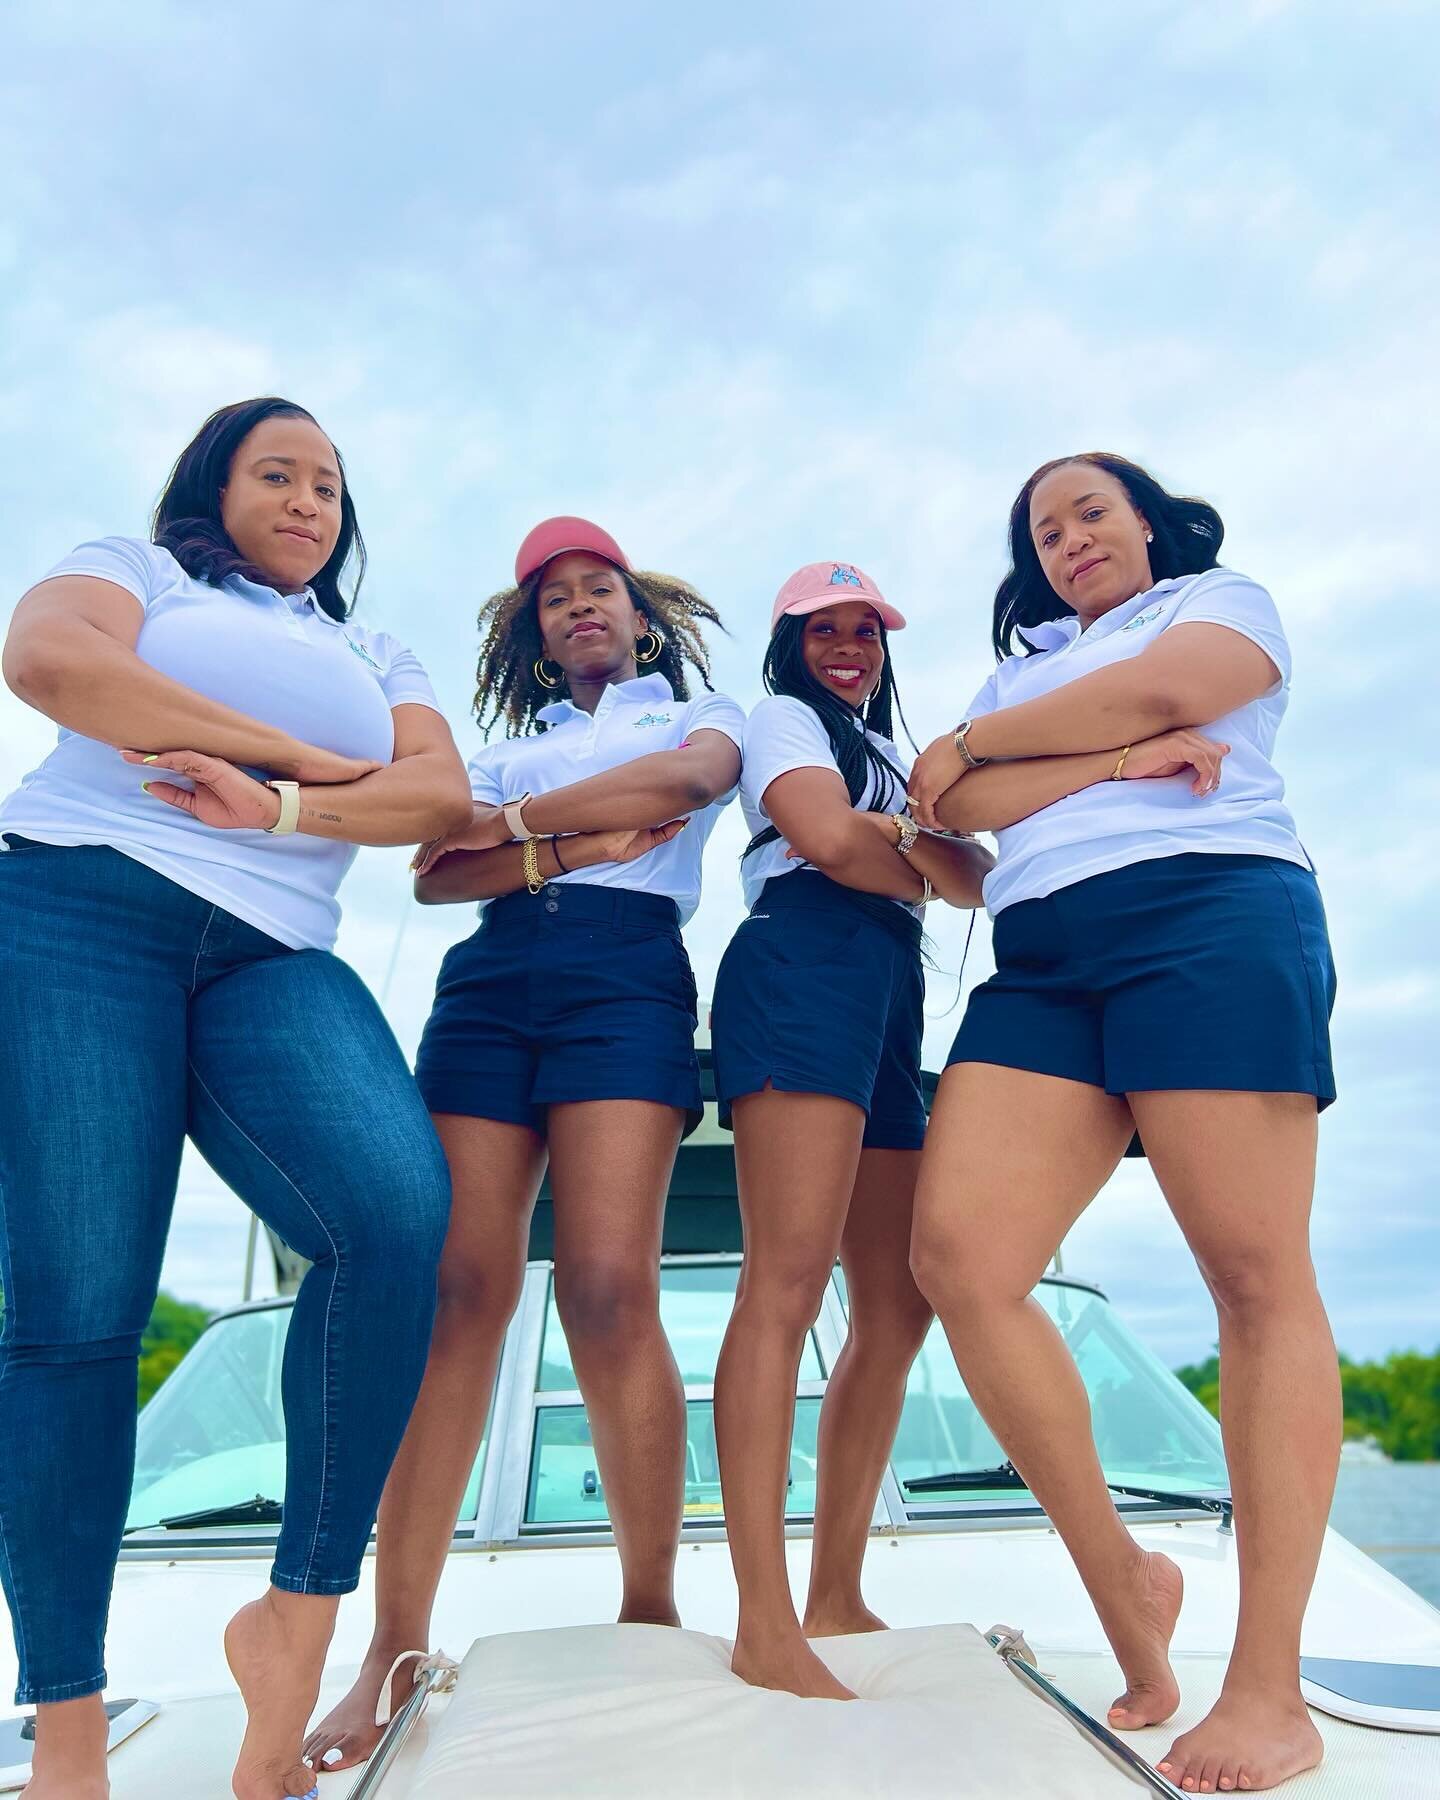 Welcome to Season 3 of Mahogany Yacht Charters💞

Mahogany Yacht Charters (recently featured in @travelnoire ), a Black Women owned, operated, and managed yacht charter company, offers a unique experience on the Potomac River in Washington, D.C like 